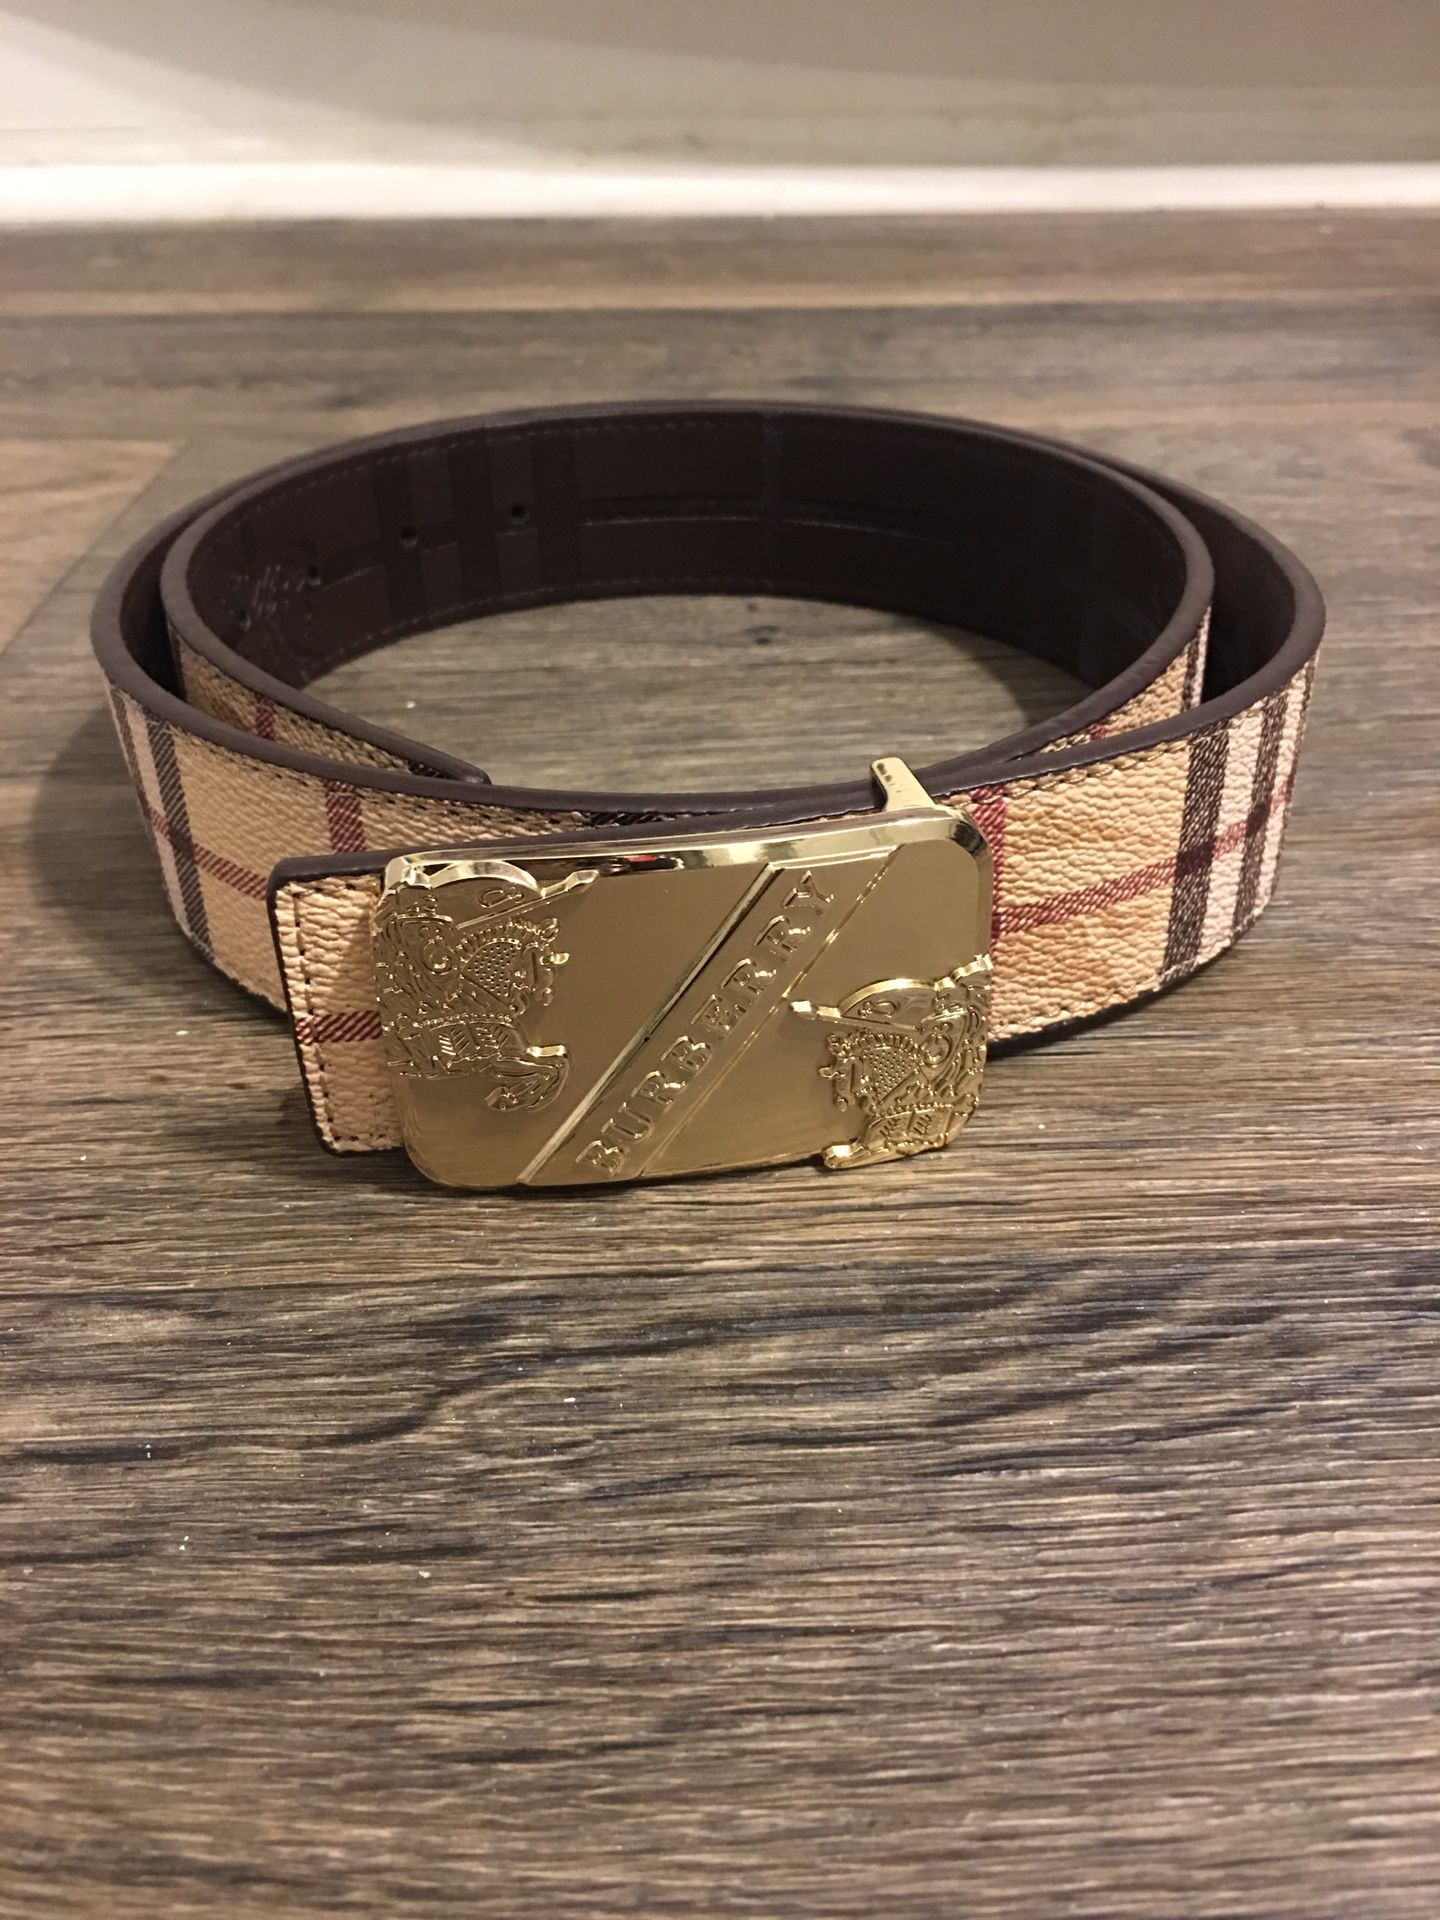 Burberry Belt for Sale in Euclid, OH - OfferUp